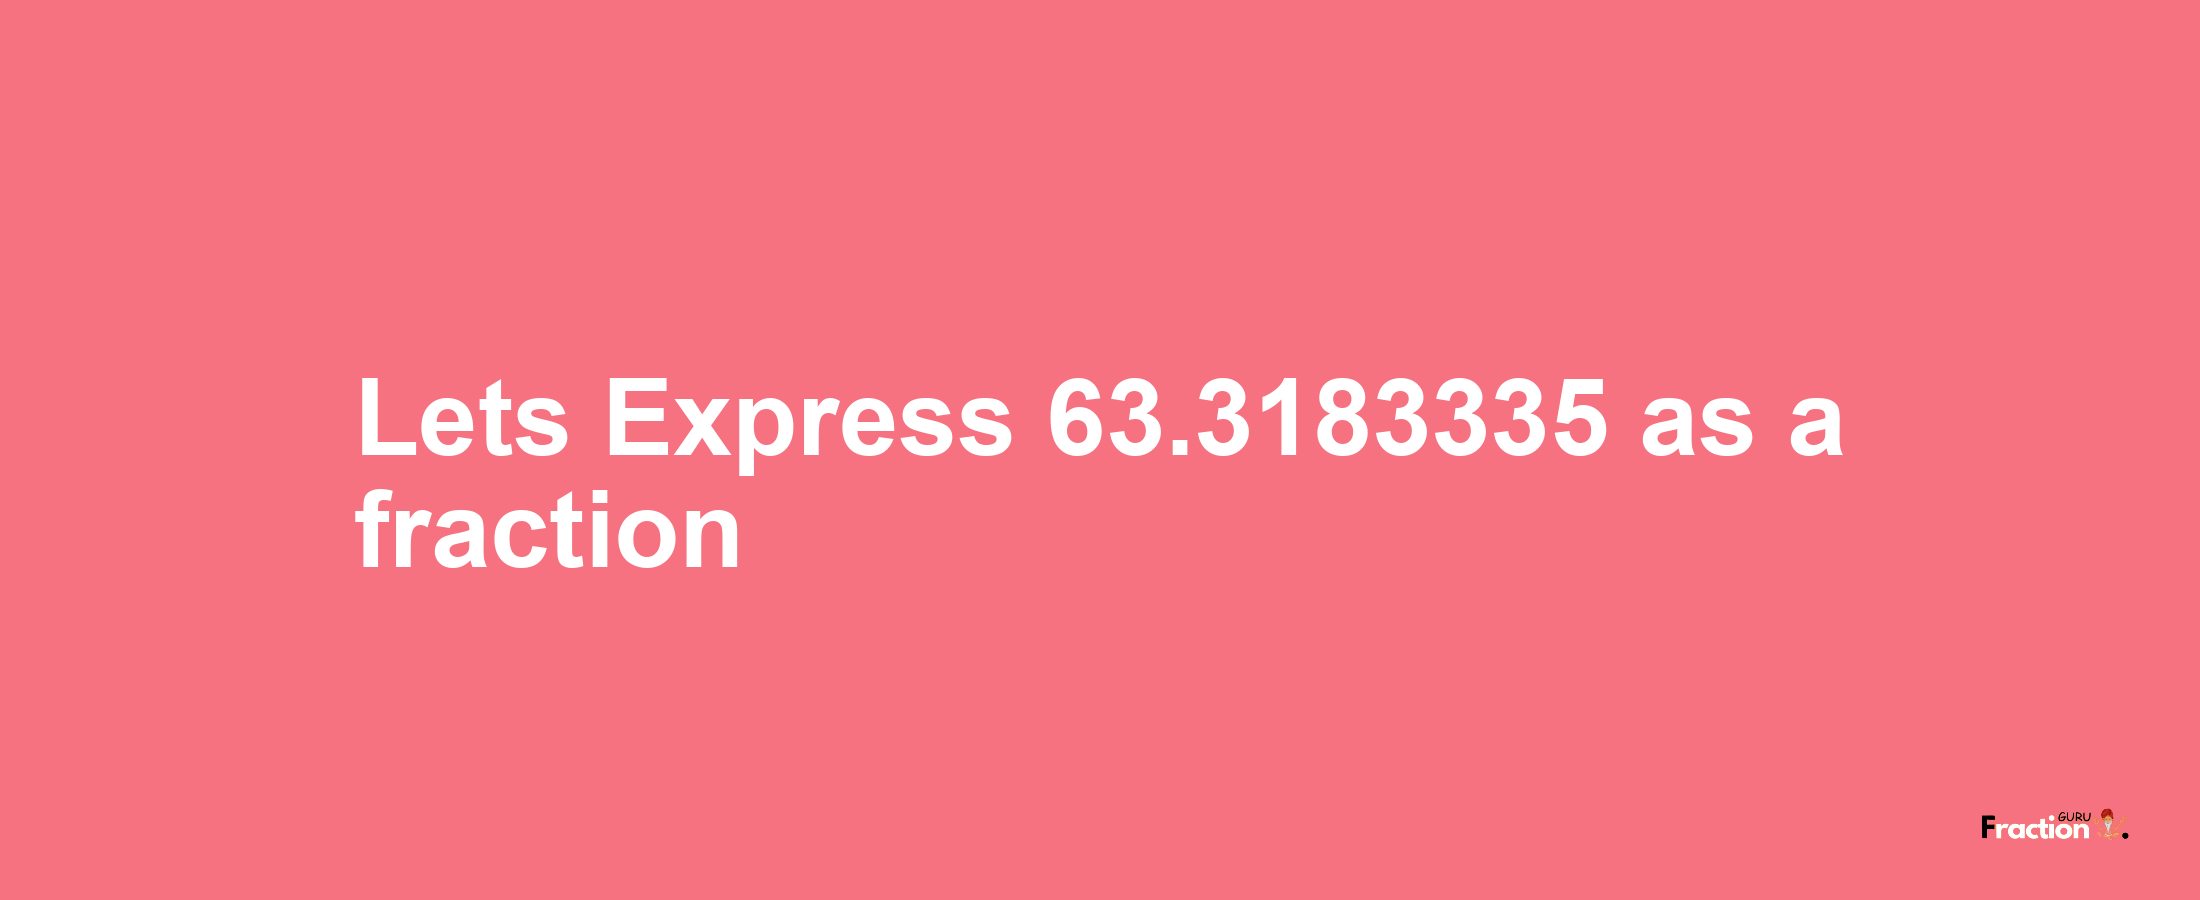 Lets Express 63.3183335 as afraction